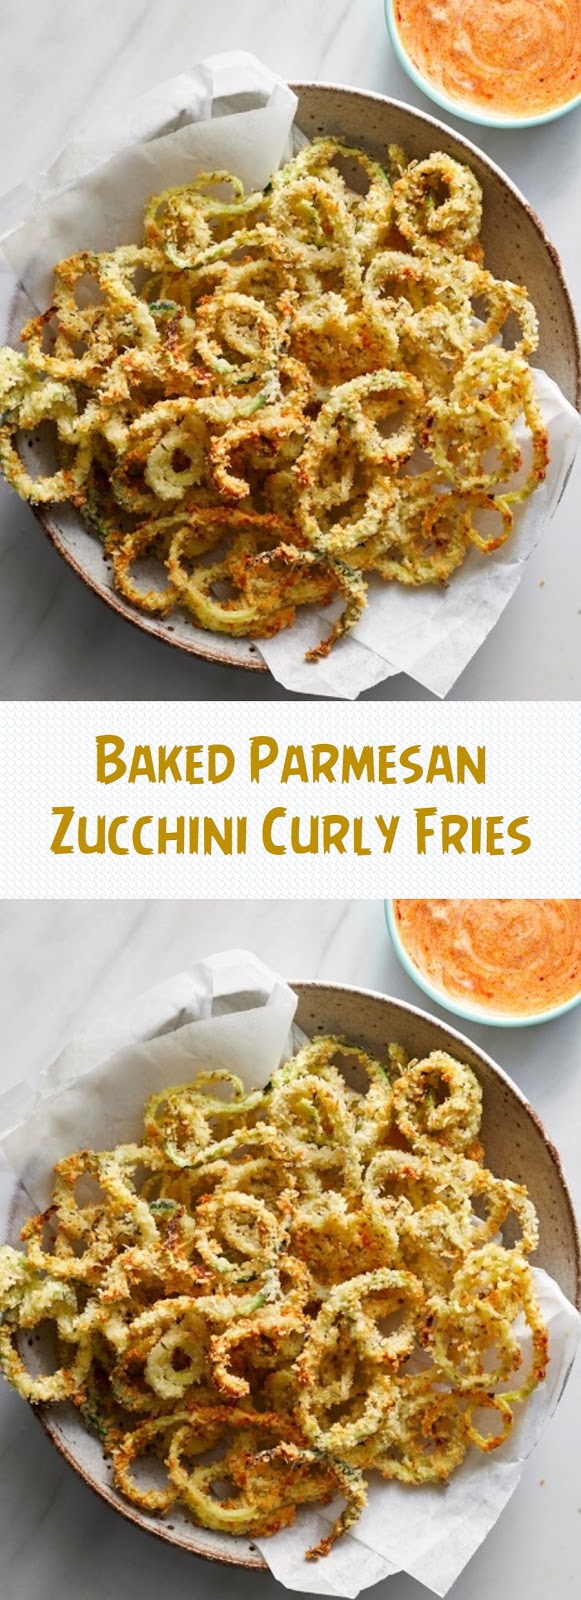 Baked Parmesan Zucchini Curly Fries